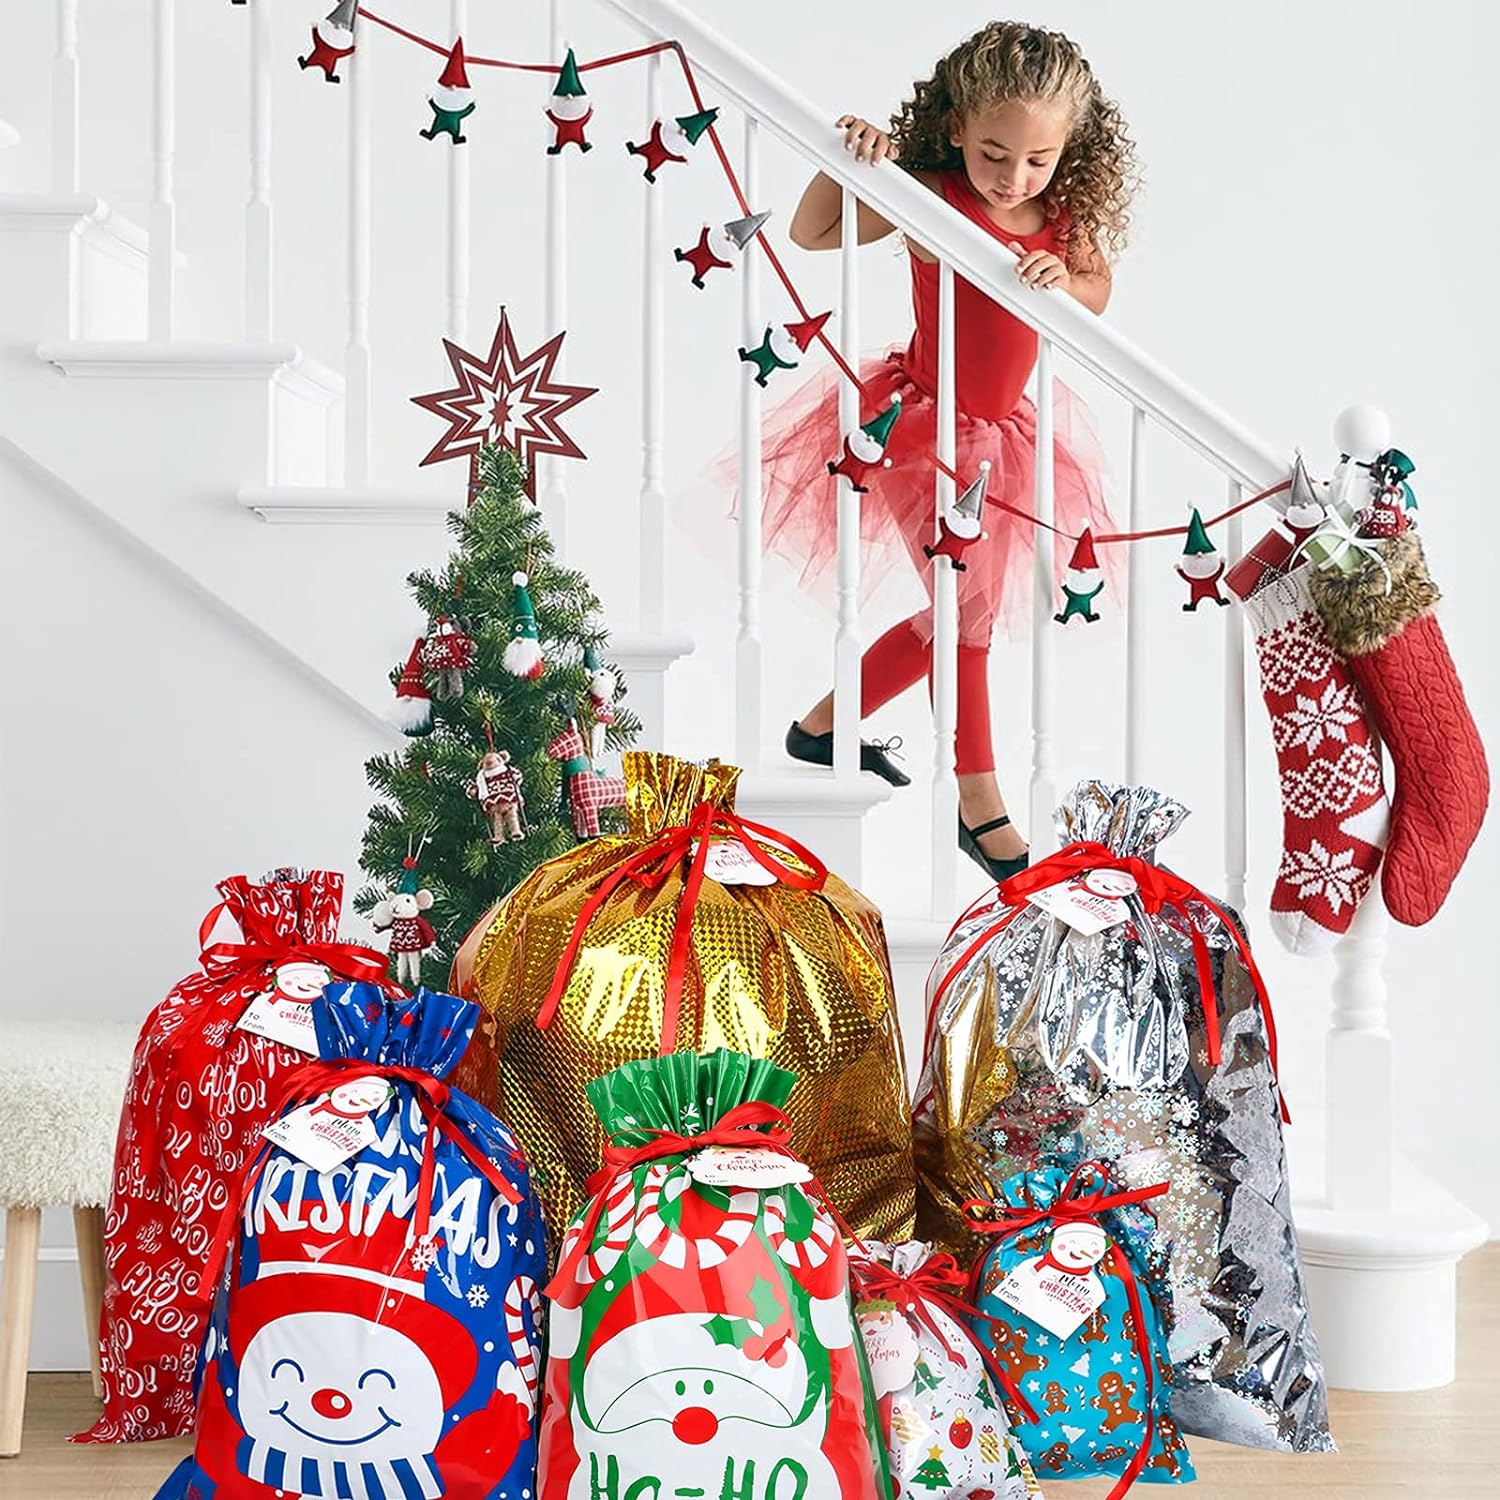 Christmas Drawstring Gift Bags with Tags, 40-Pack $14.99 After Code (Reg. $24.99) – $0.38 Each, 8 Sizes & 8 Designs, Makes Wrapping Easy